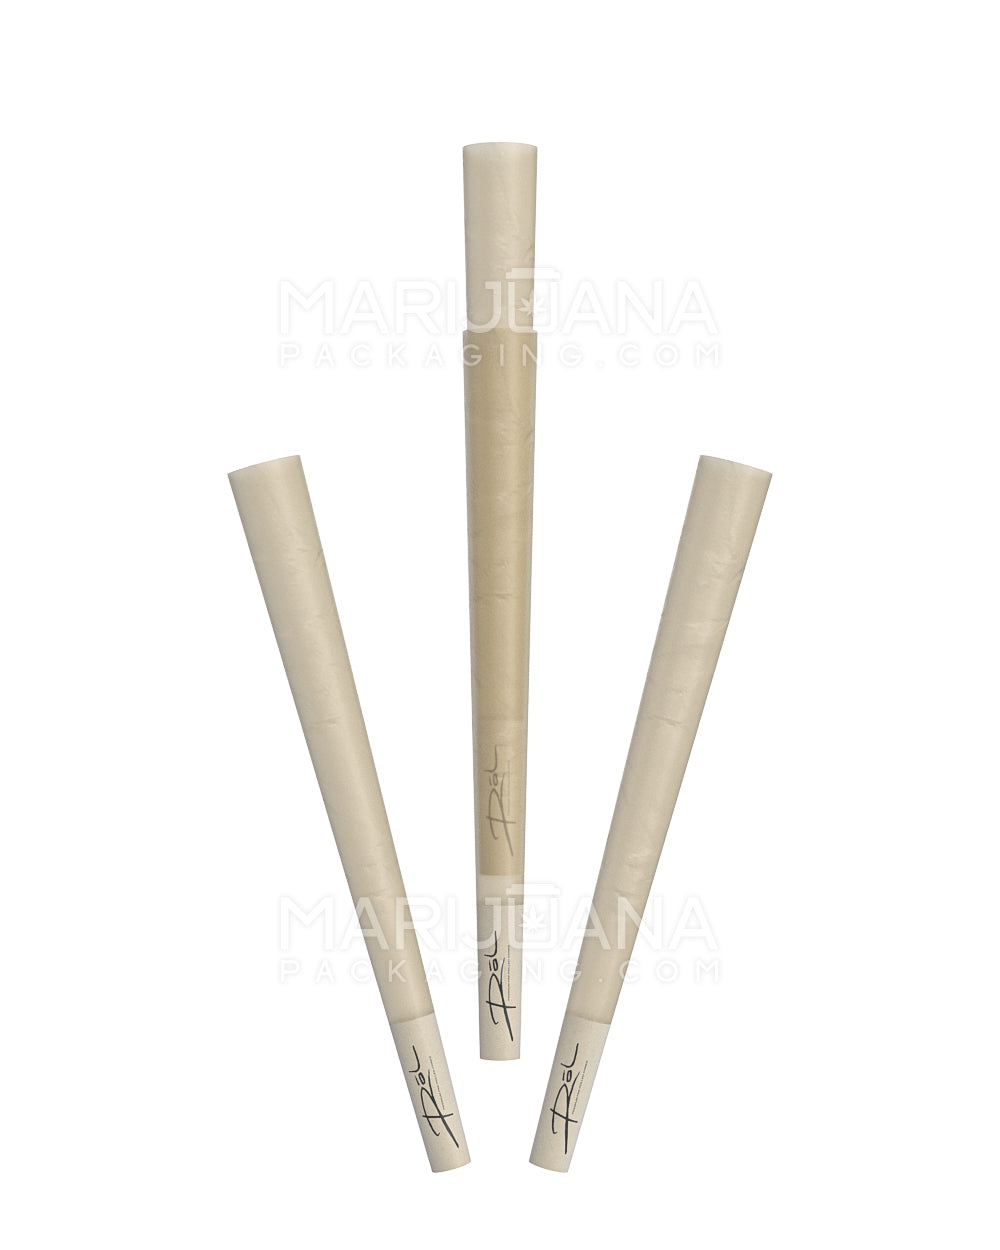 RōL | 98 Special Size Pre-Rolled Cones | 98mm - Khaki Brown Paper - 800 Count